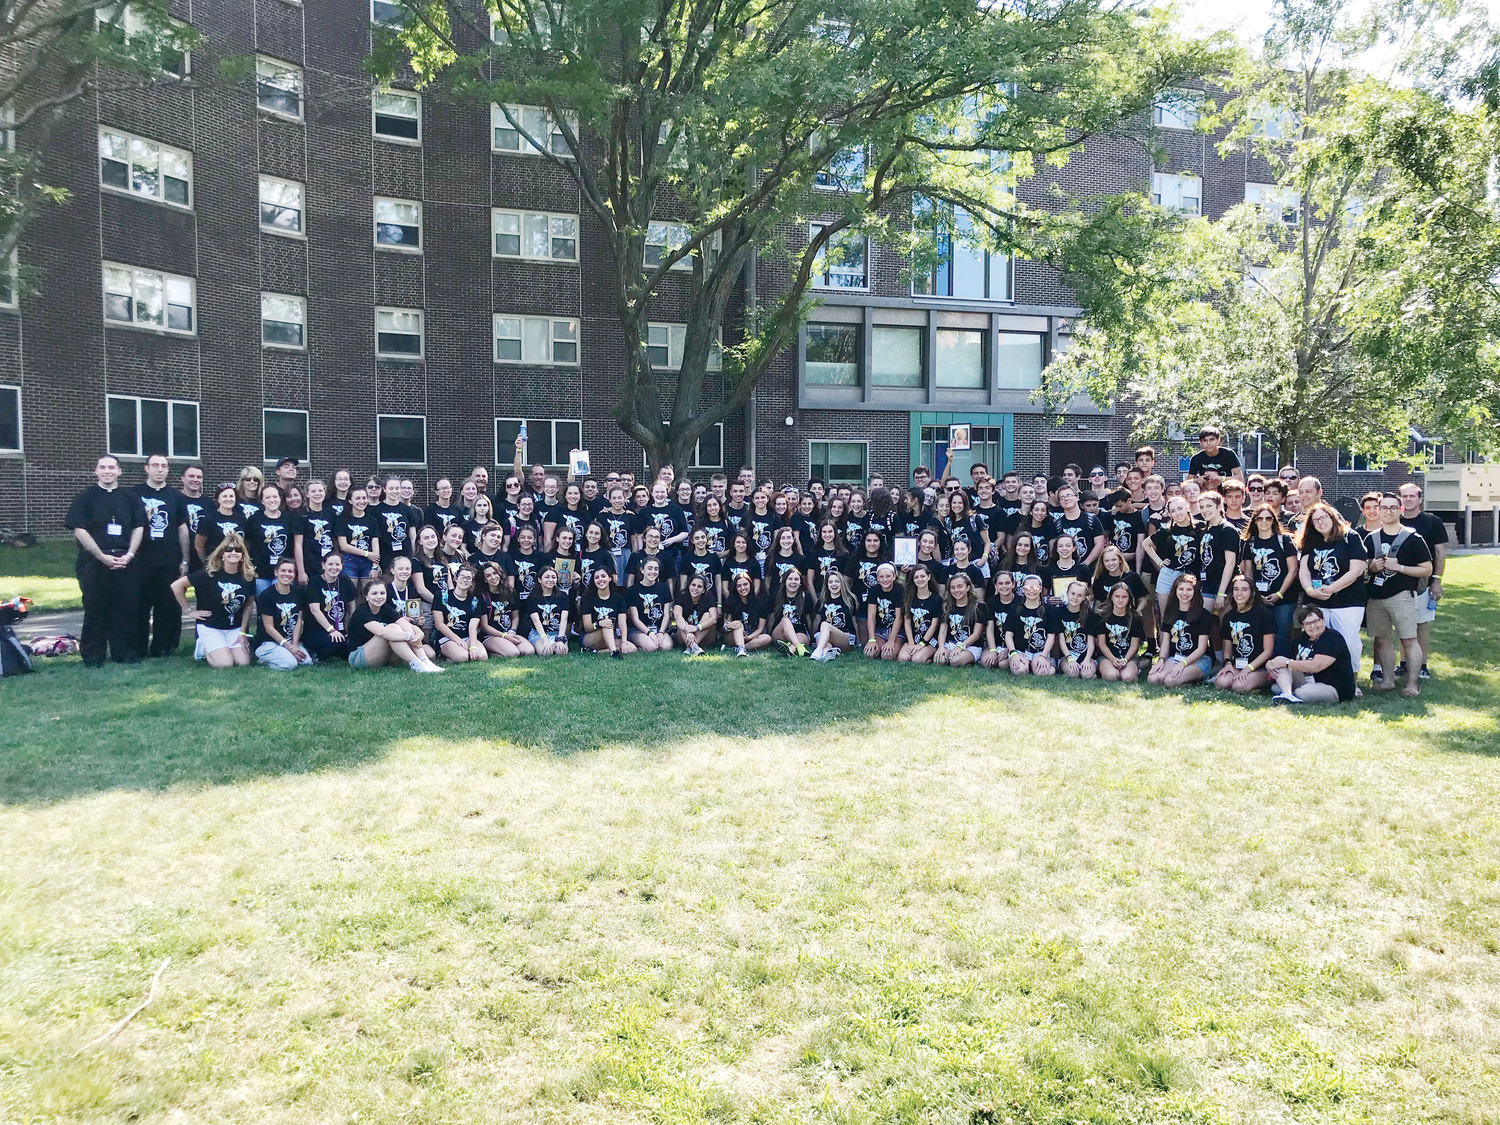 More than 100 youth from St. Philip Church in Greenville made up the largest group in attendance at Steubenville East this summer held July 13-15 at UMass Lowell.